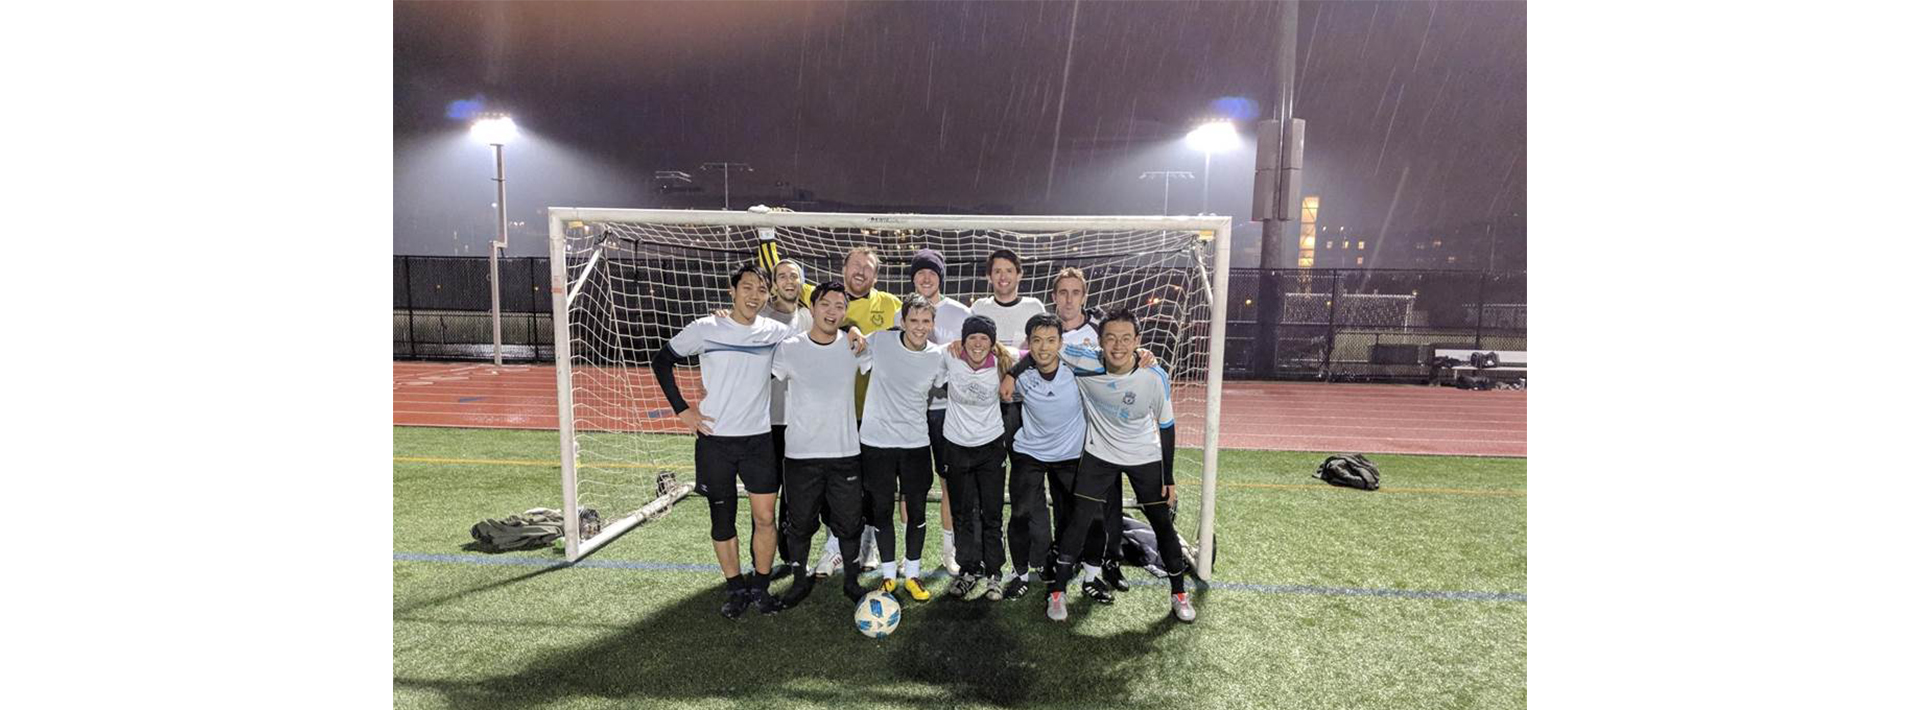 CEE intramural soccer team wins championship game against DUSP